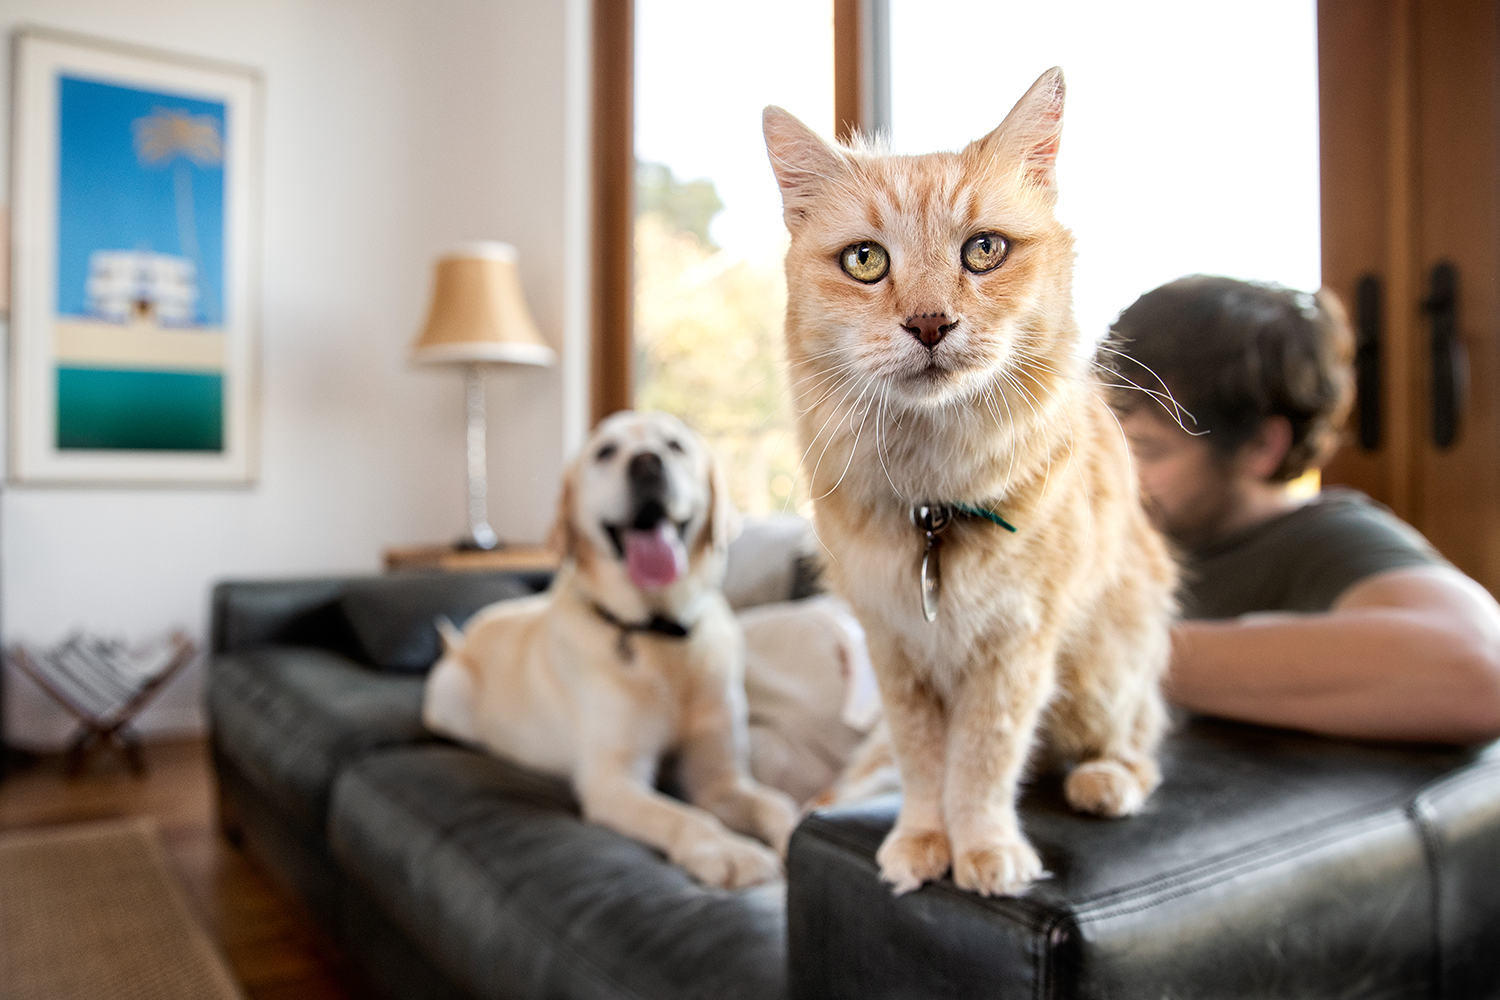 A cat standing on the arm of a couch, while a man and a dog lay on the couch in the background